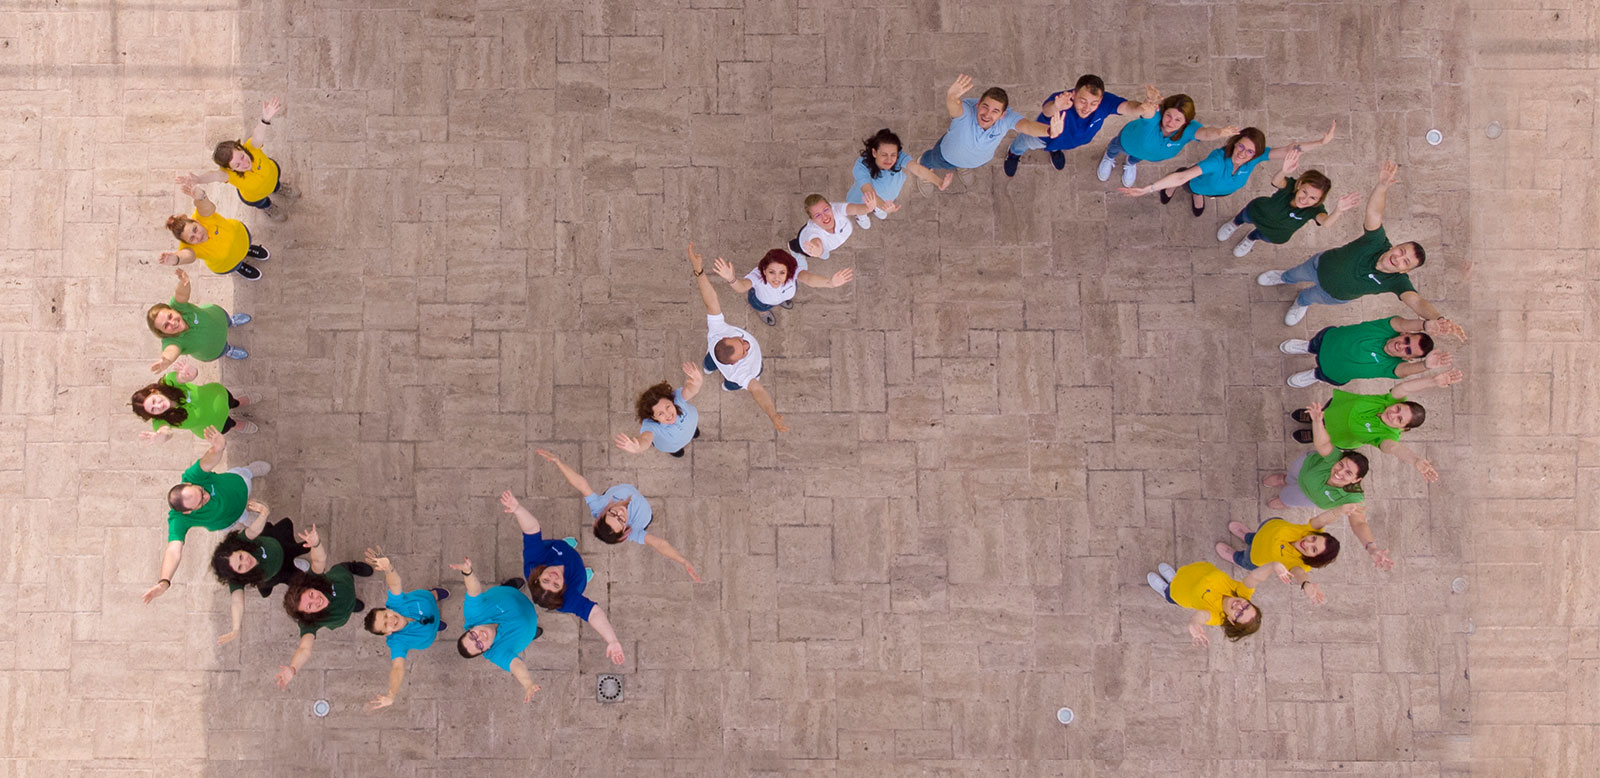 SmartBill team forming the S-shaped symbol, photographed from above